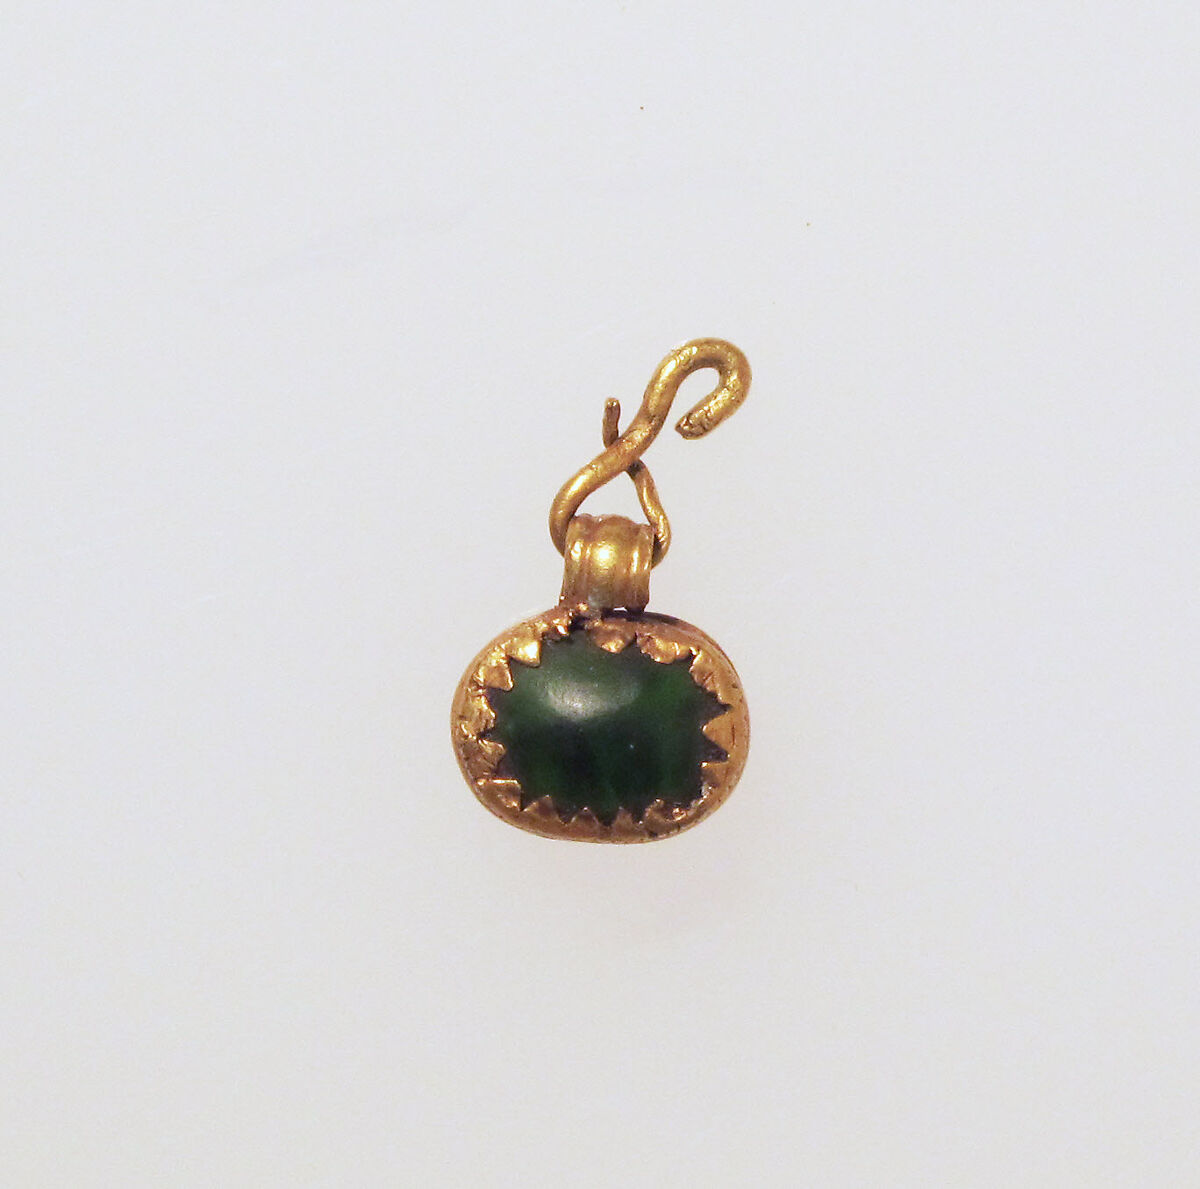 Pendant with scaraboid, Gold, glass paste 